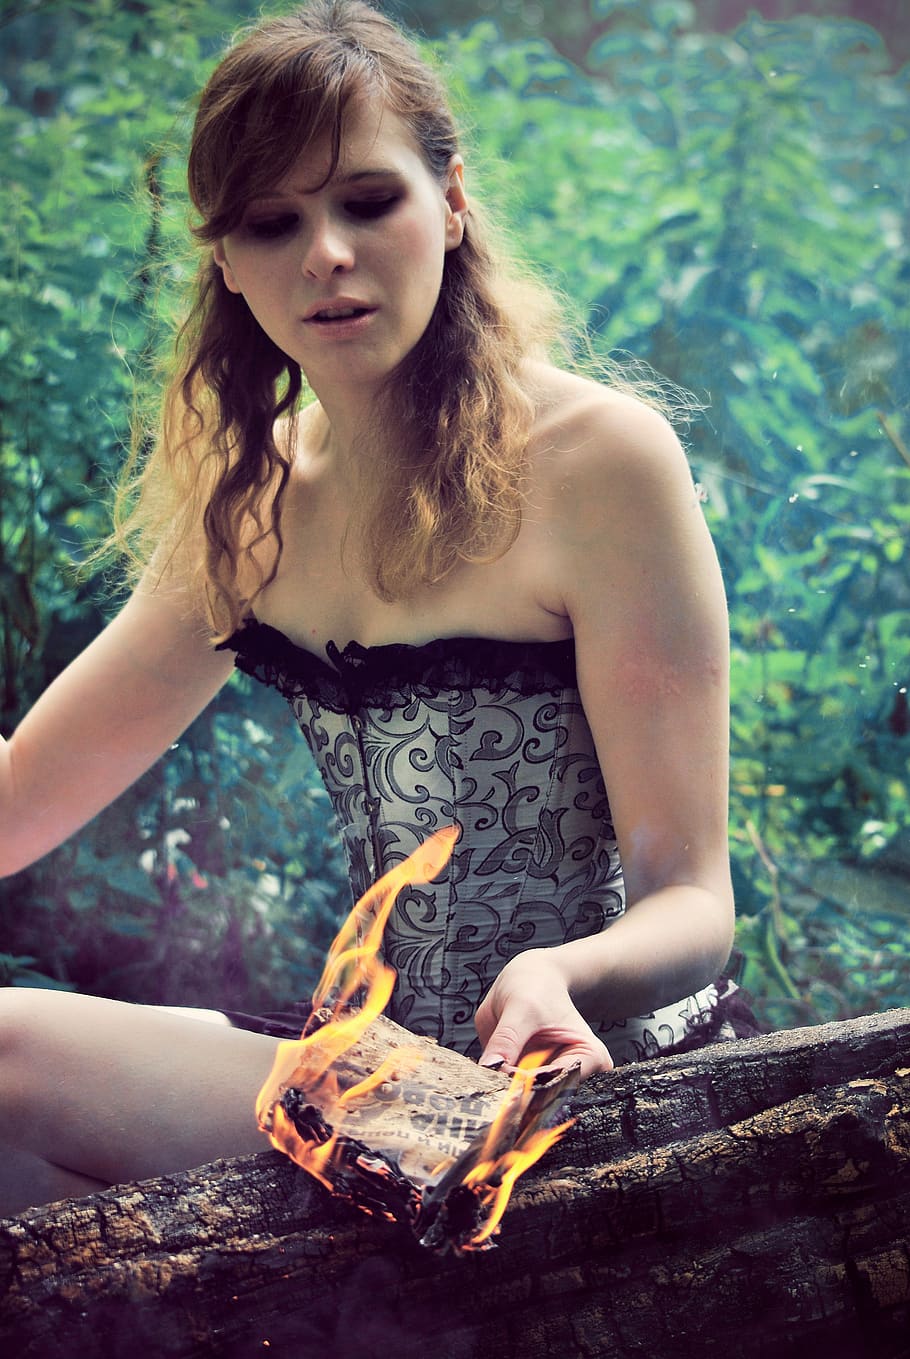 the girl conjures, kindles a fire, witch, burns the paper, koster, to build a fire, burned, burns, burning, fire